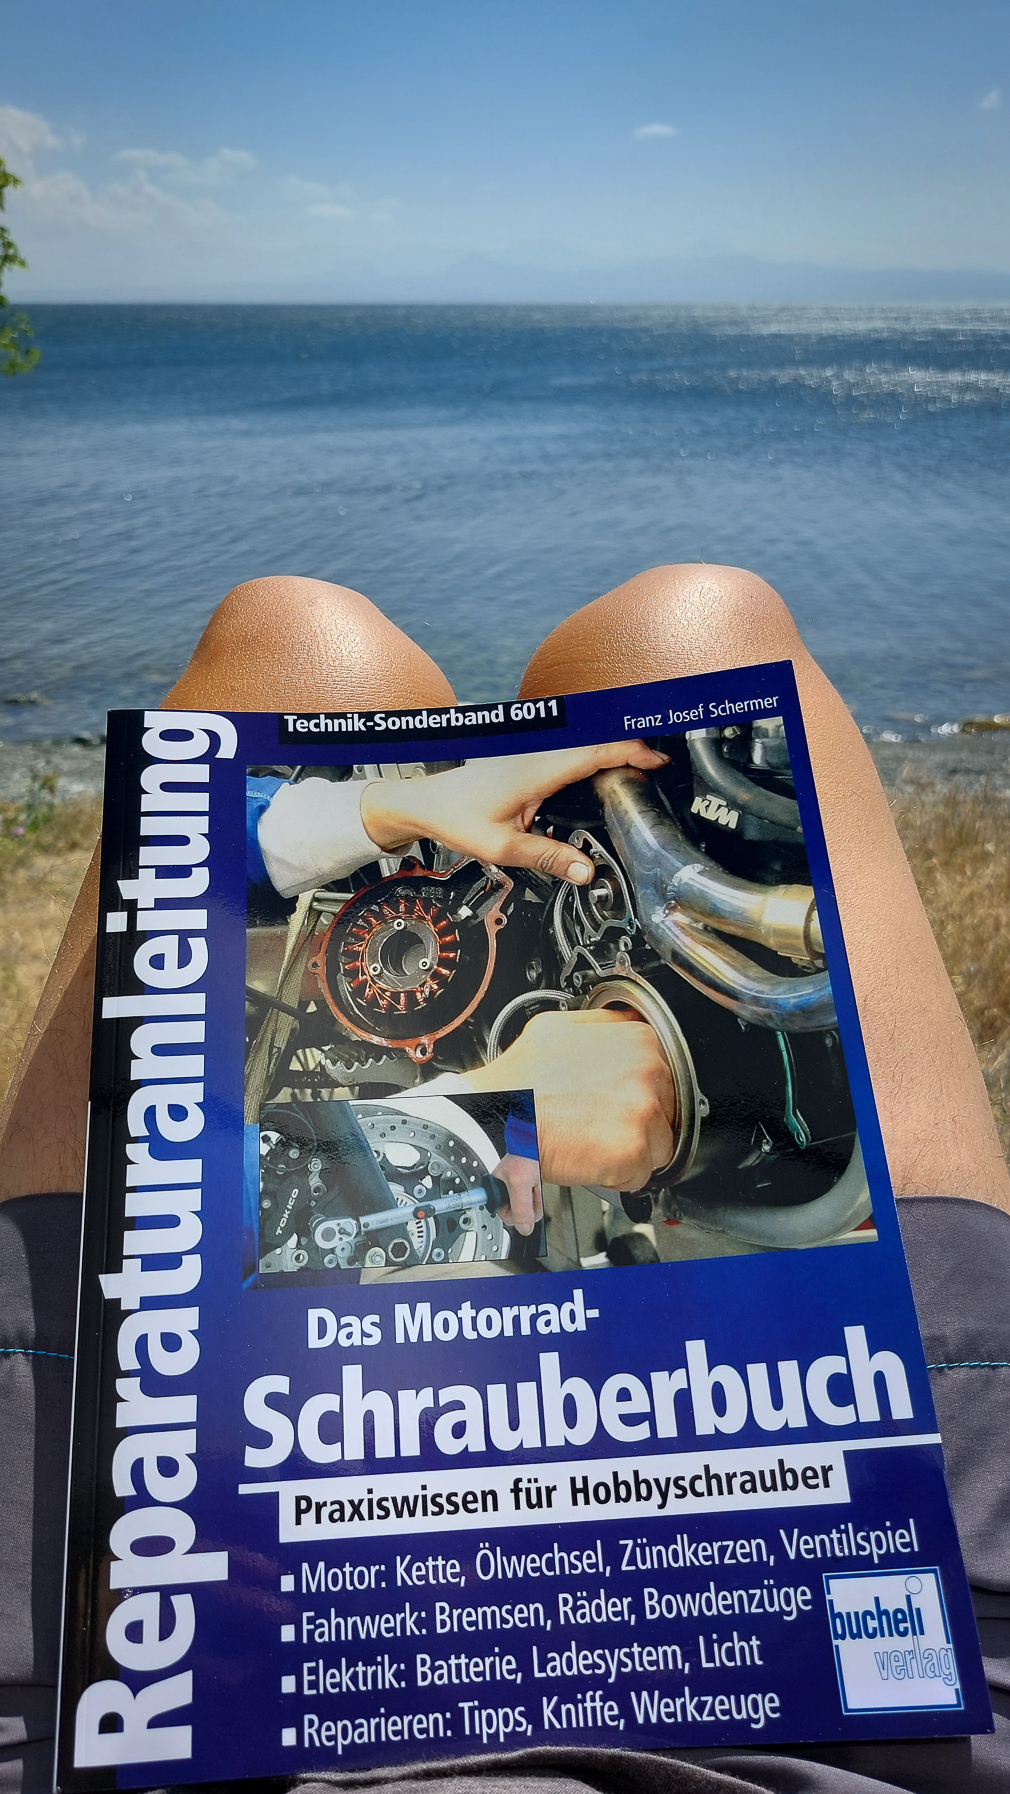 <span  class="uc_style_uc_tiles_grid_image_elementor_uc_items_attribute_title" style="color:#ffffff;">Wischnewski-life, today: fixing the bike (not running smooth, filter polluted...). Workbook is on board (was a very useful present from 'Armin' - Thanks!)</span>